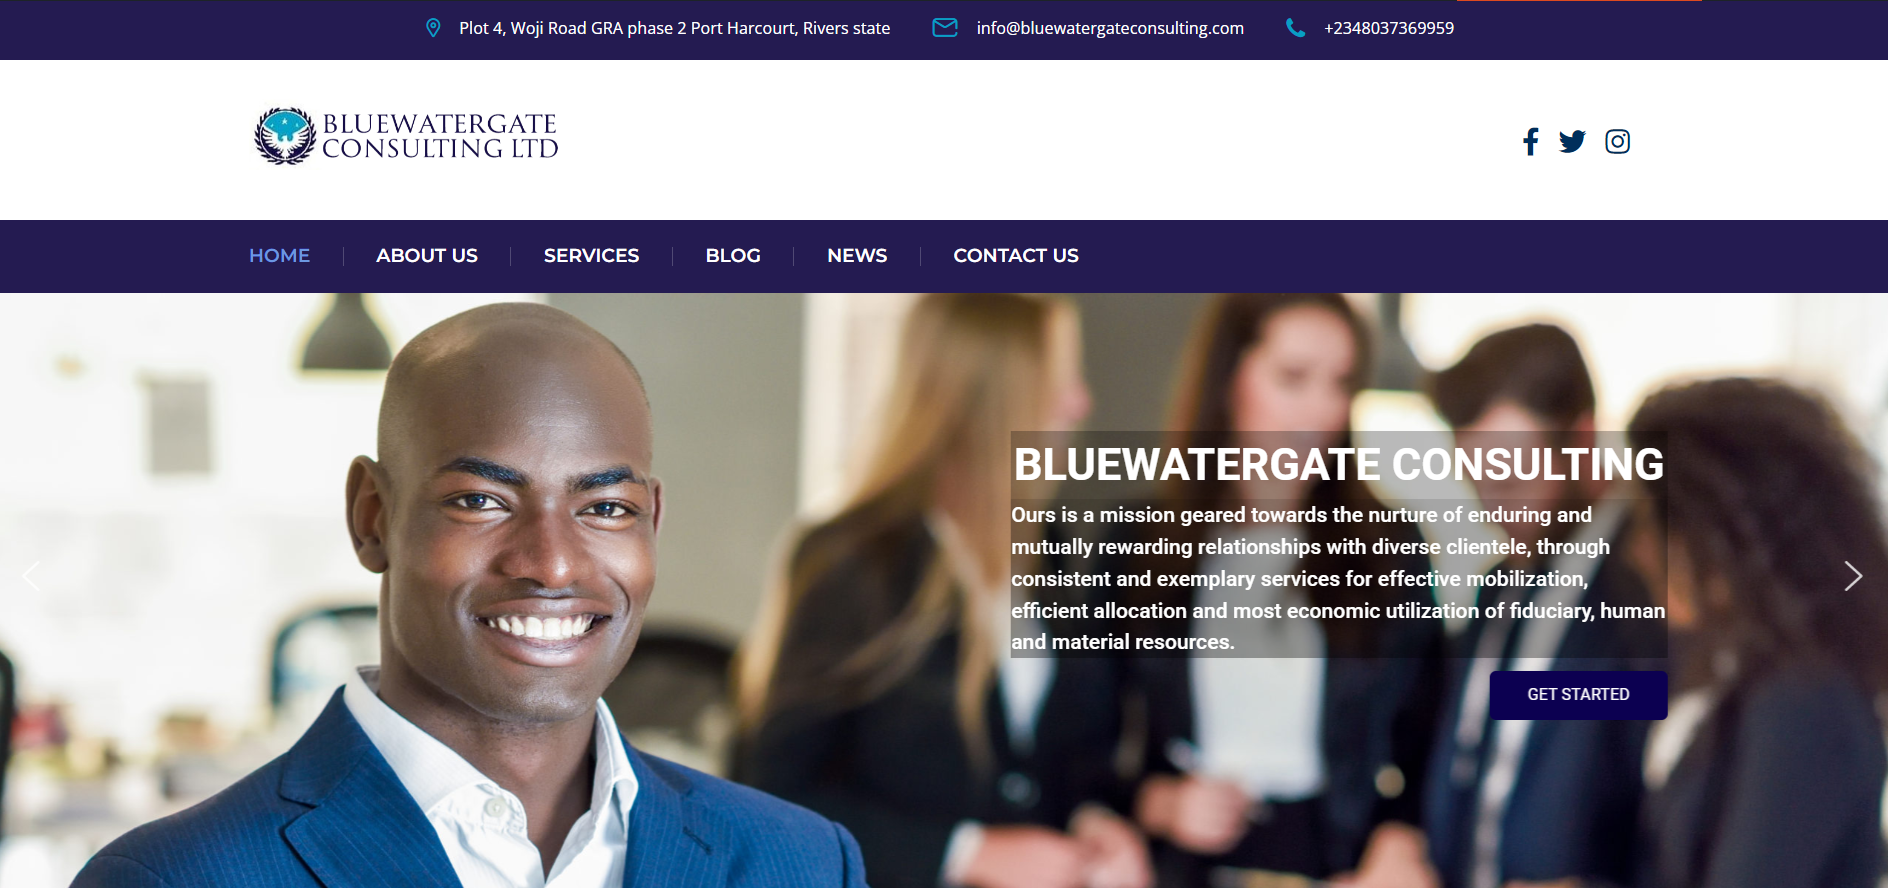 Bluewatergate consulting